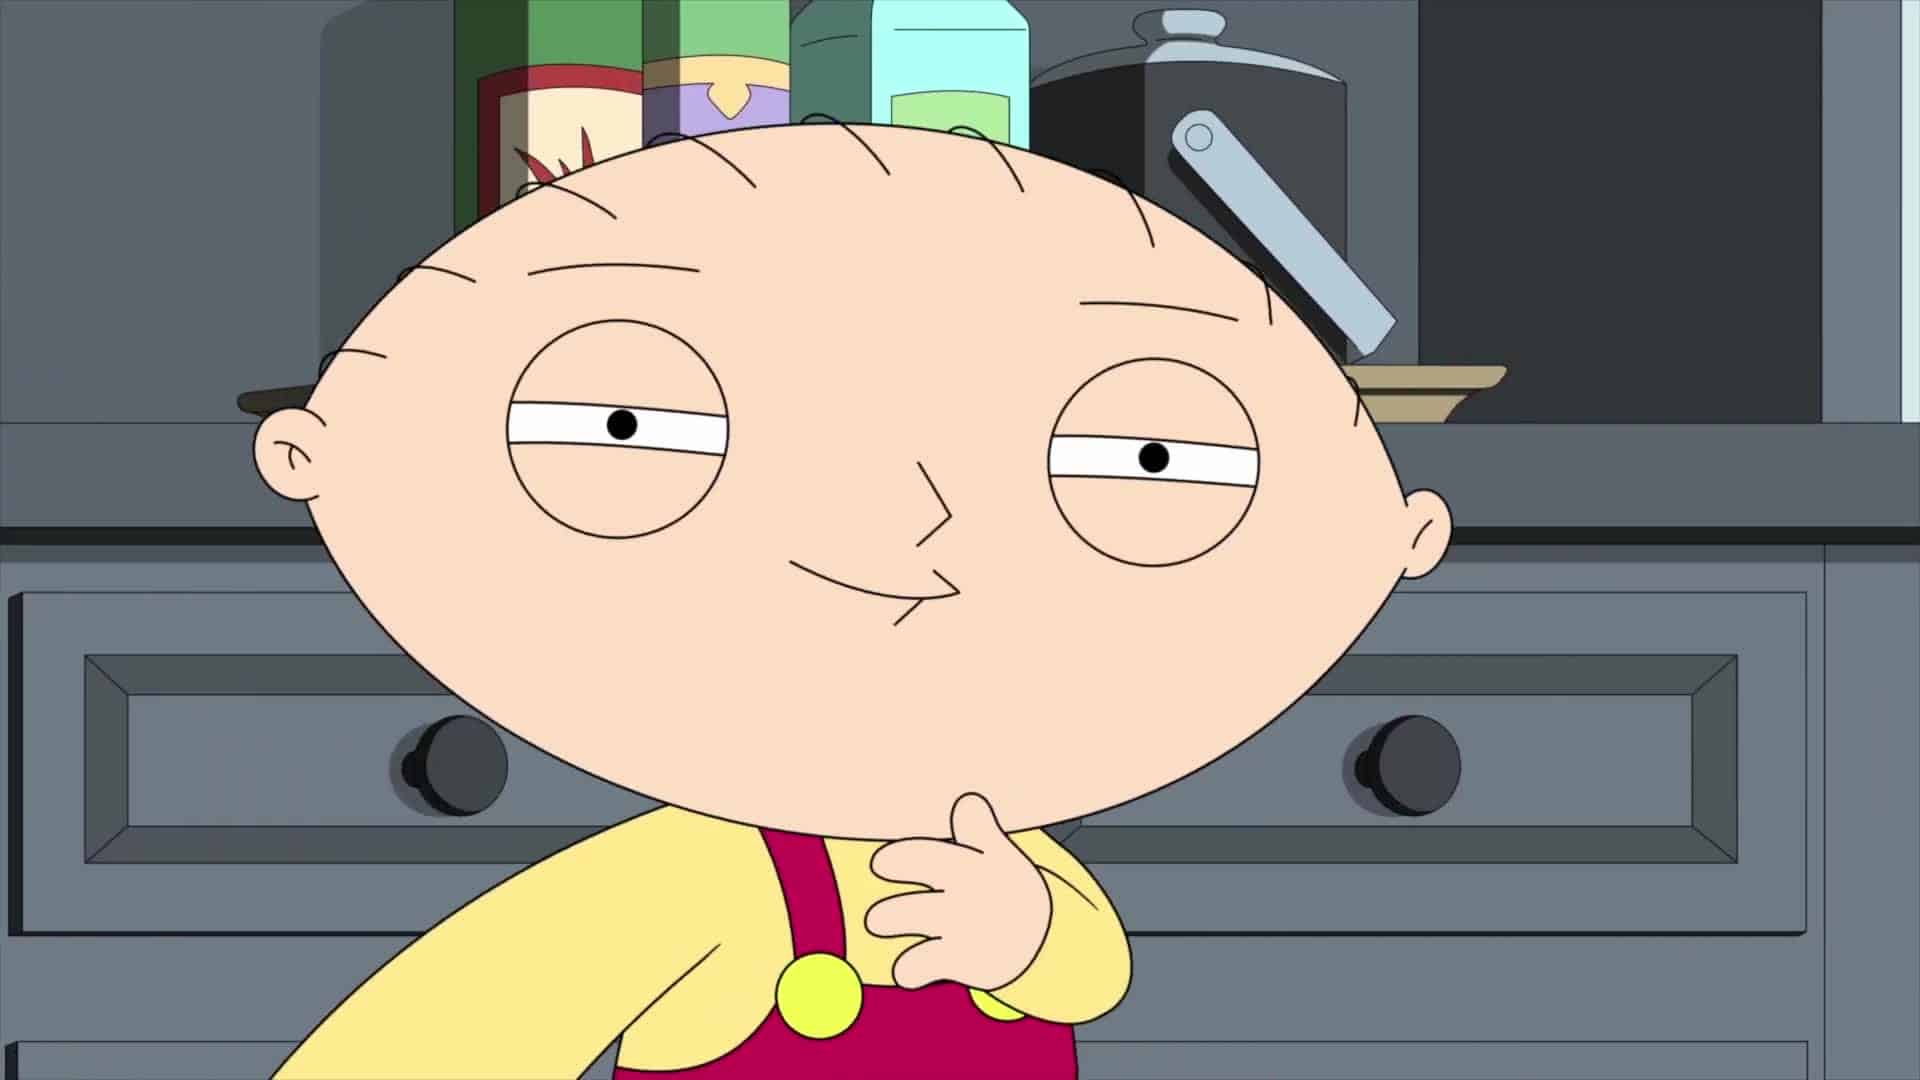 Stewie from Family Guy